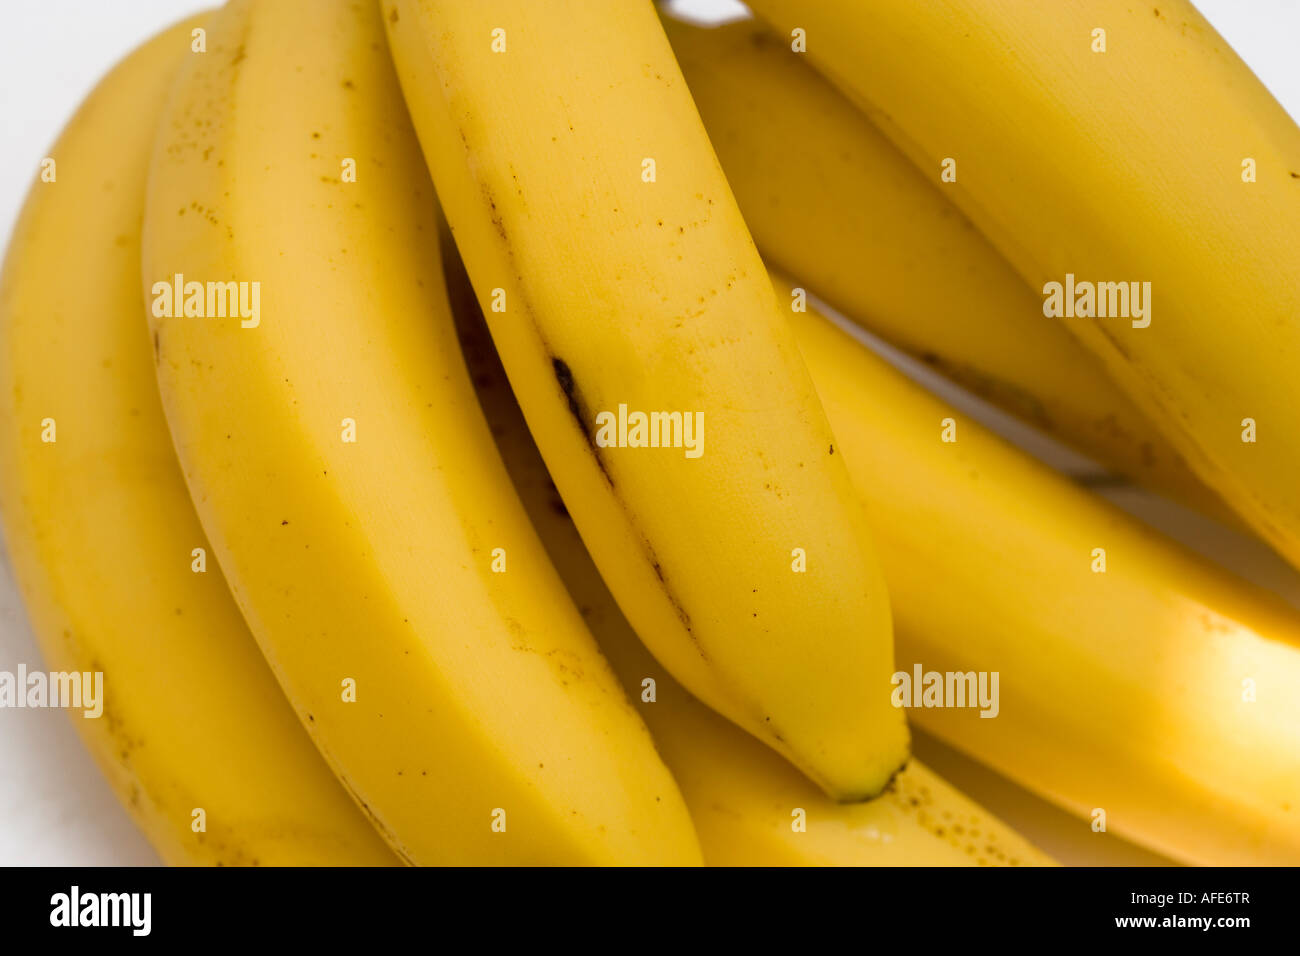 Bunch of ripe banannas close cropped Stock Photo